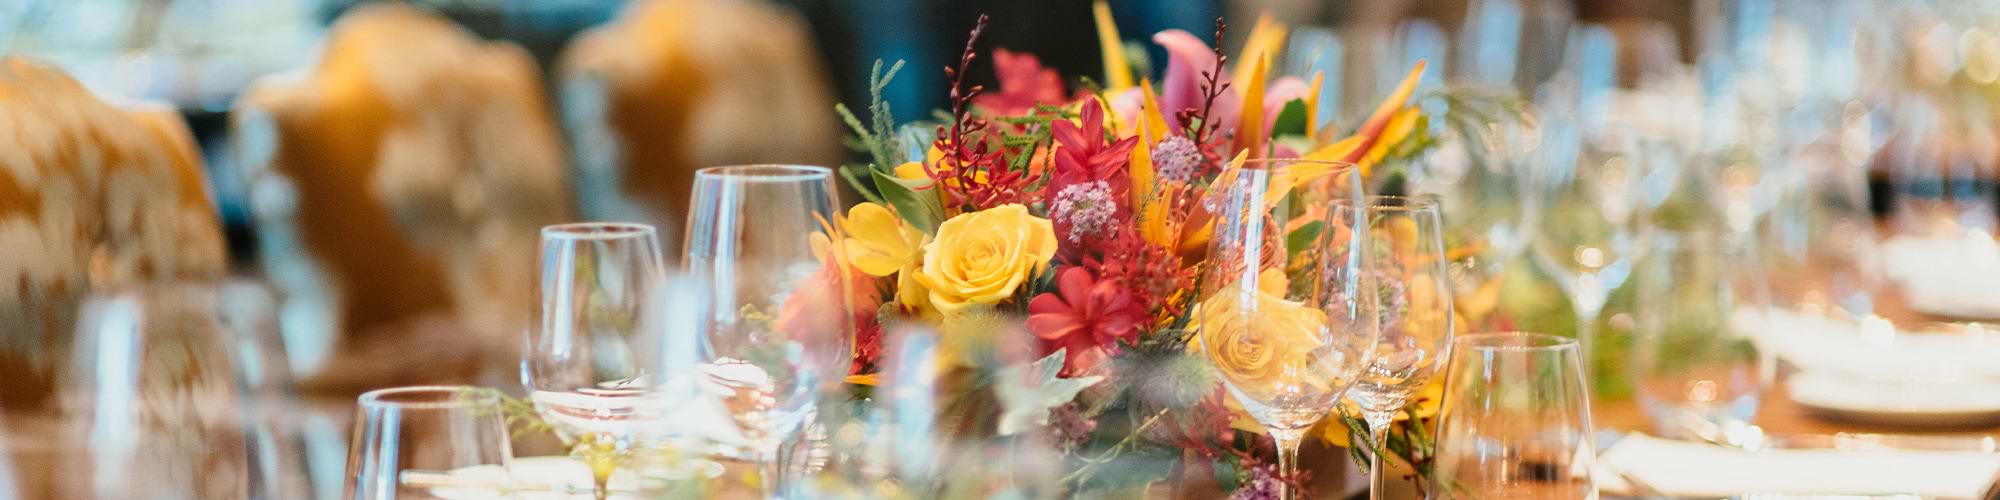 Abbey Catering - San Diego - Events that Shine